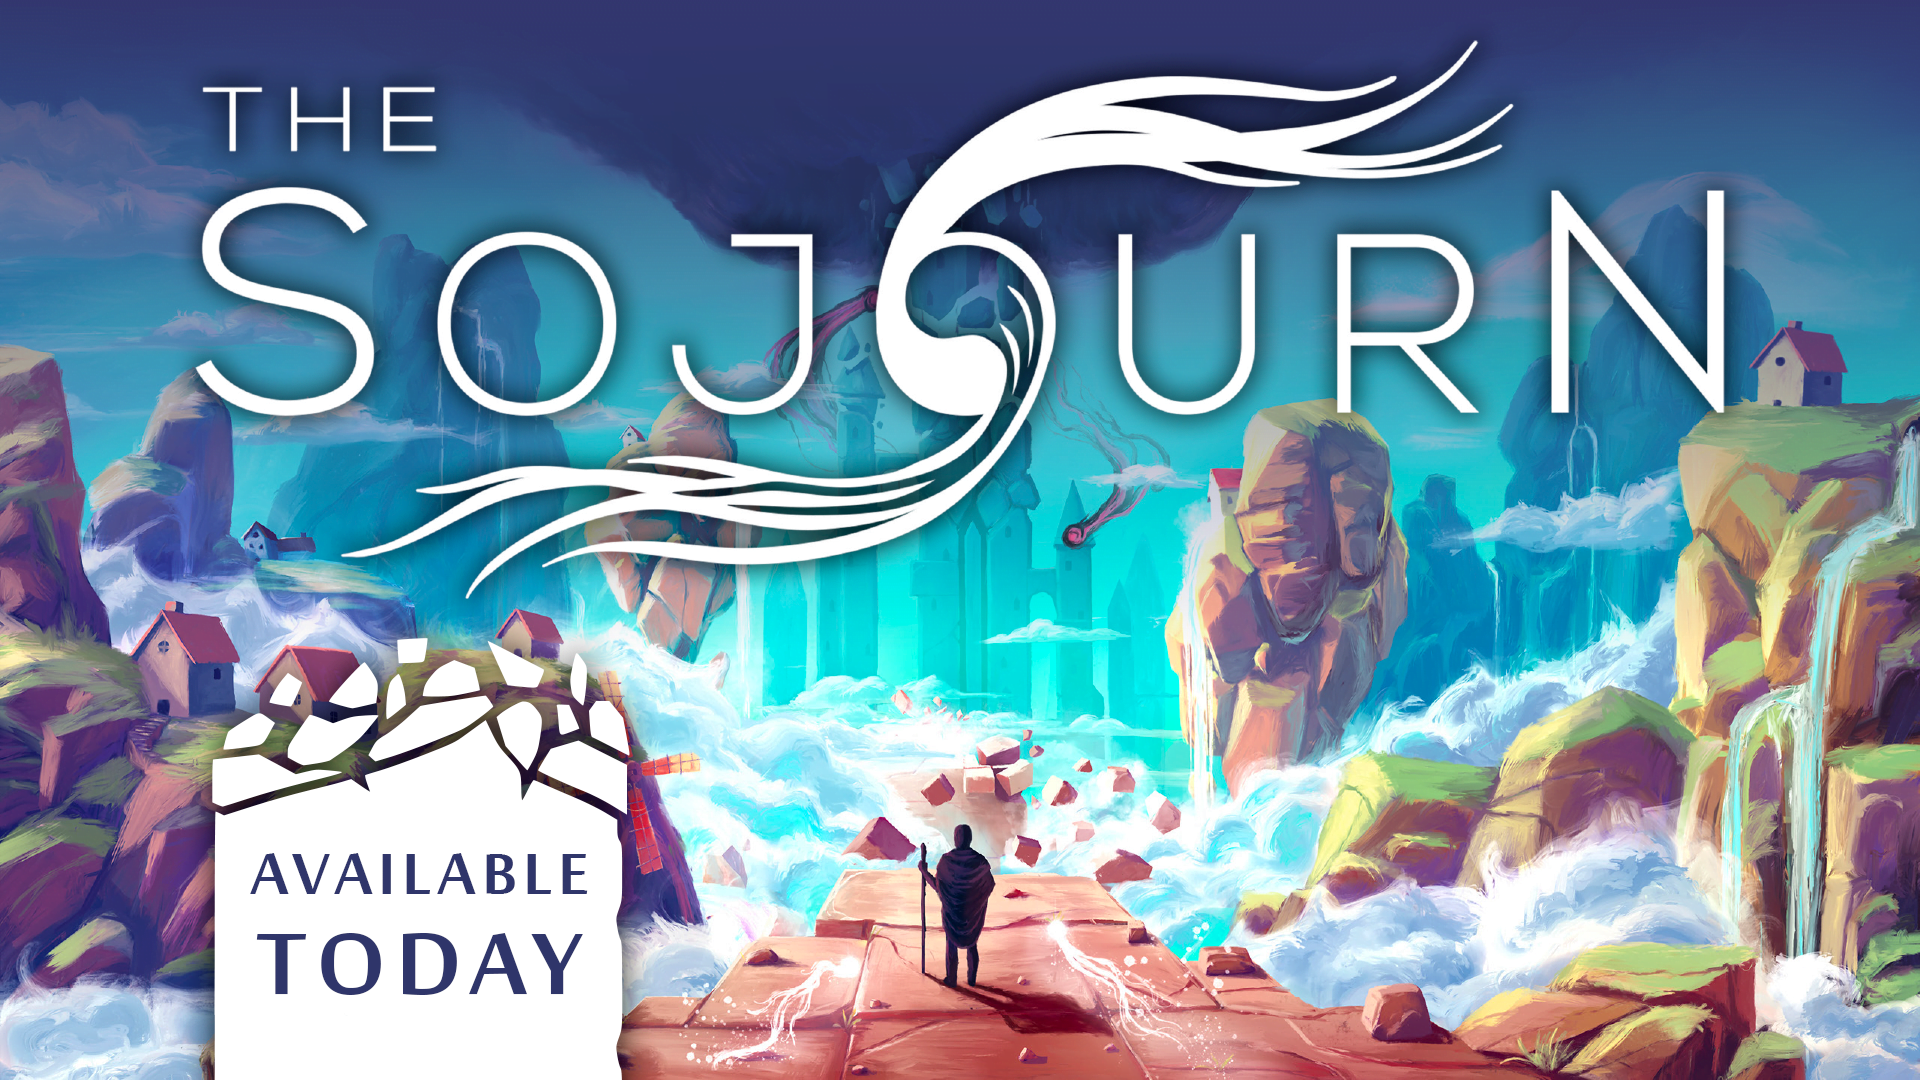 The sojourn: jogo puzzle já disponível! | the sojourn available today | married games party gamer | party gamer | the sojourn